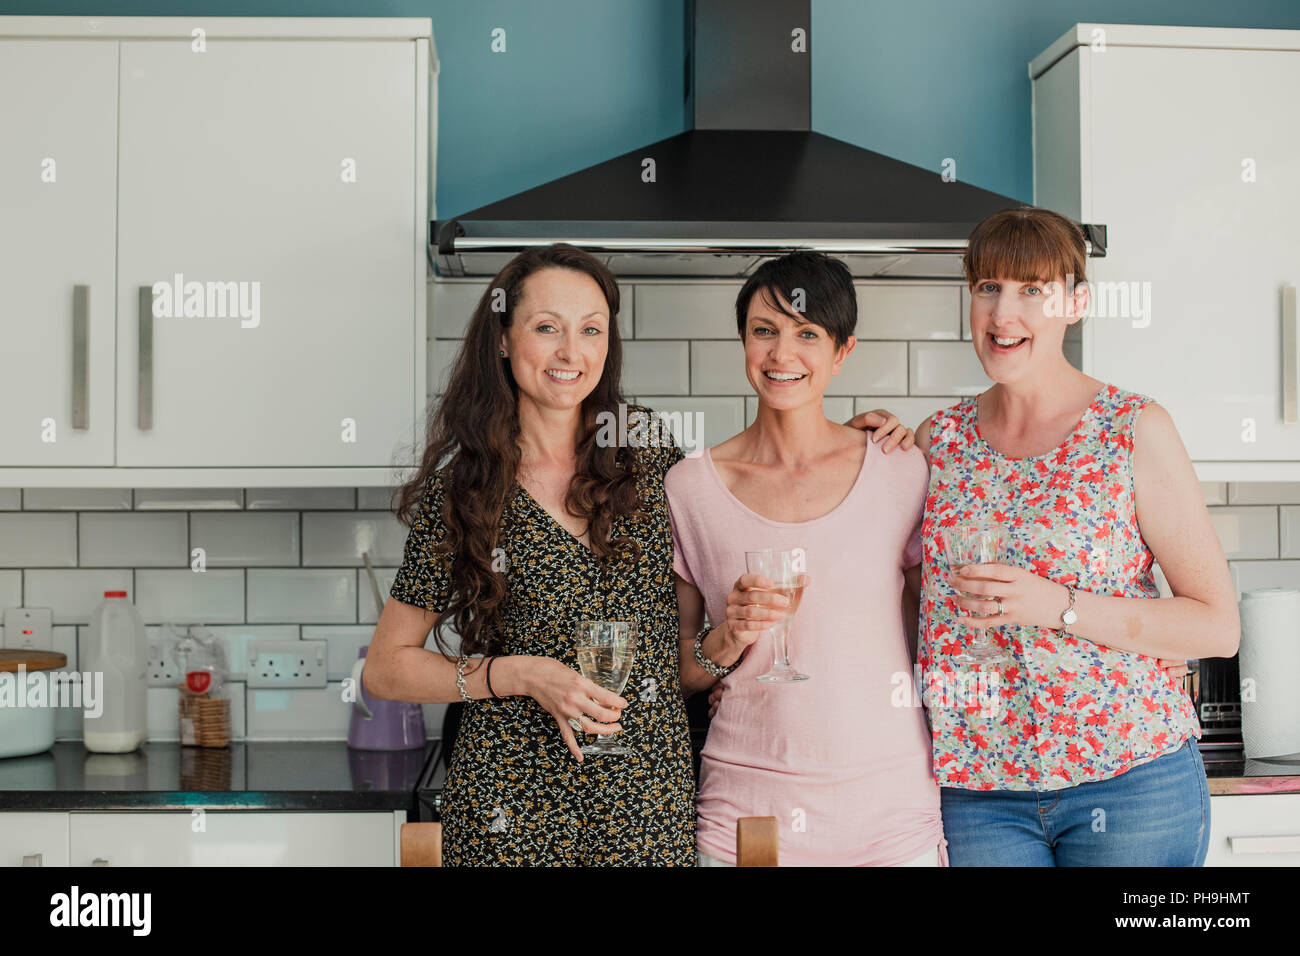 Three mid adult women standing in a kicthen enjoying a glass of wine. The women are all standing around the stove in the kitchen, looking at the camer Stock Photo